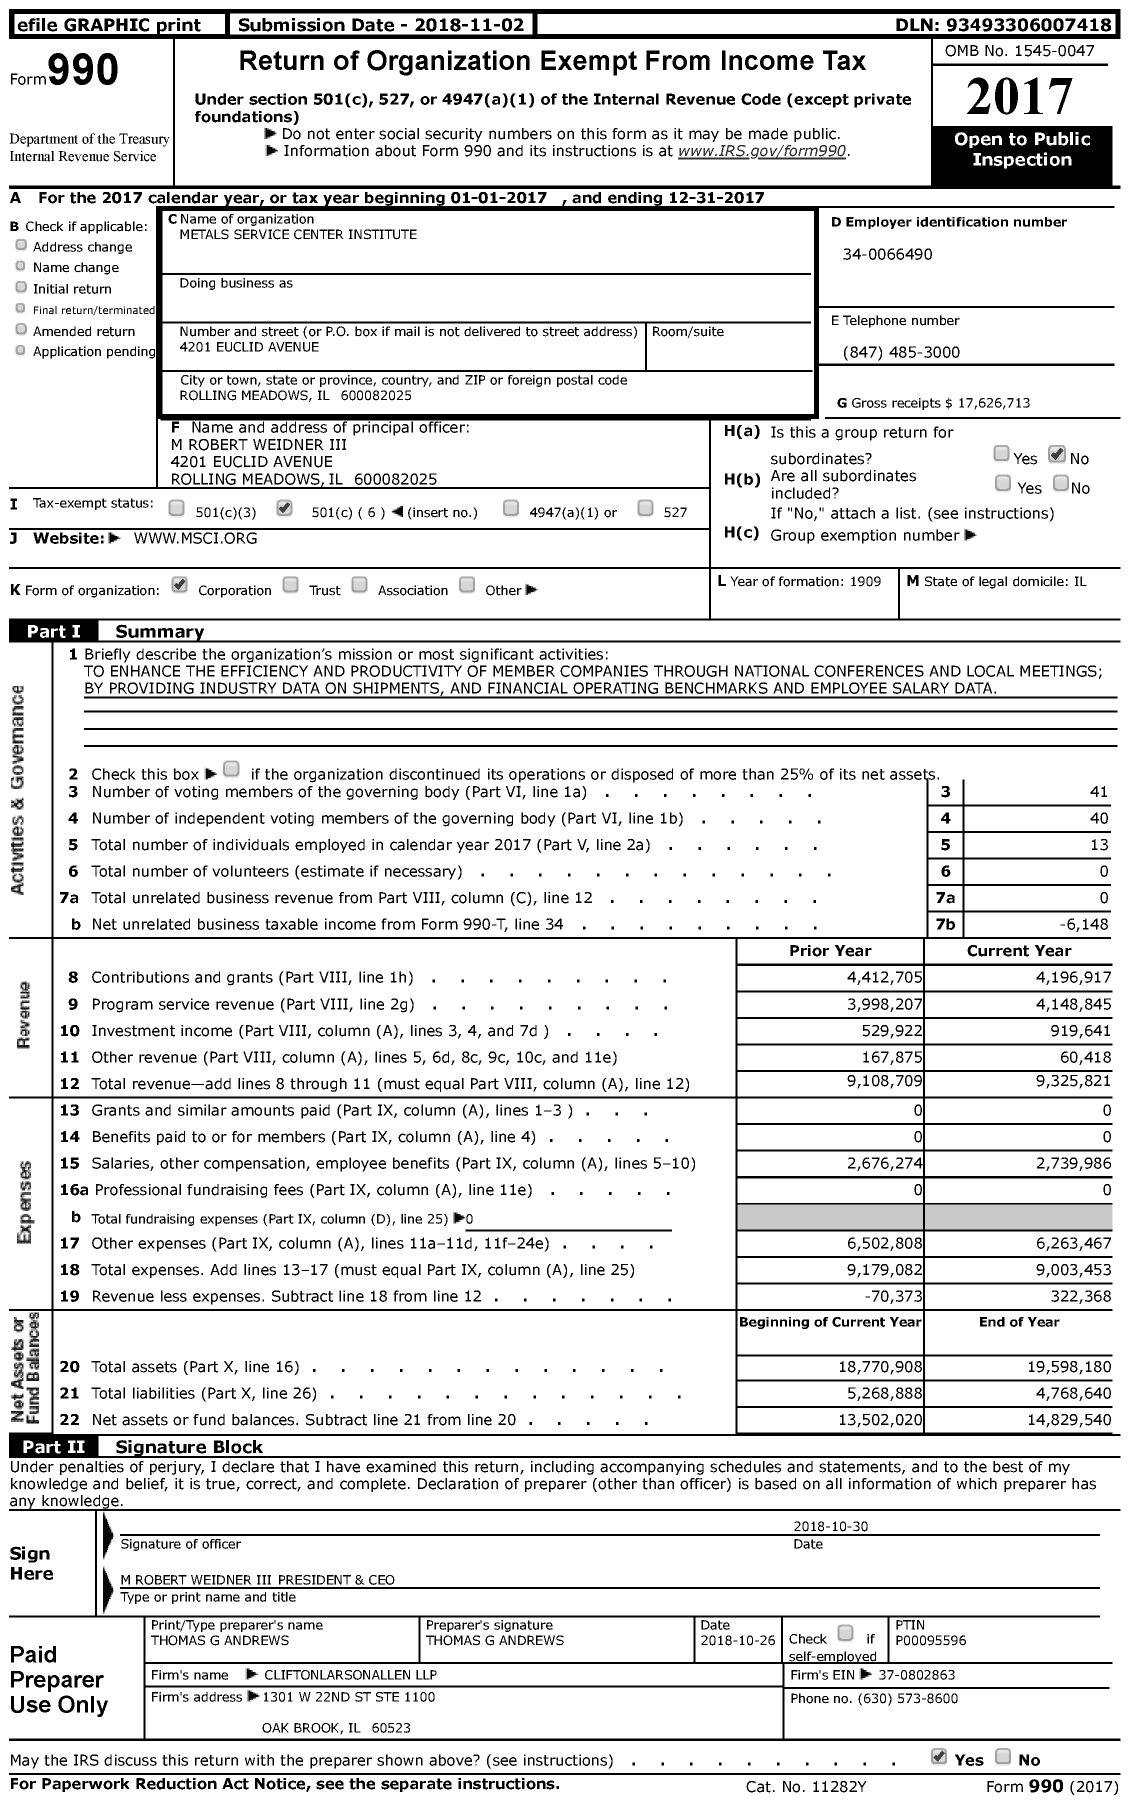 Image of first page of 2017 Form 990 for Metals Service Center Institute